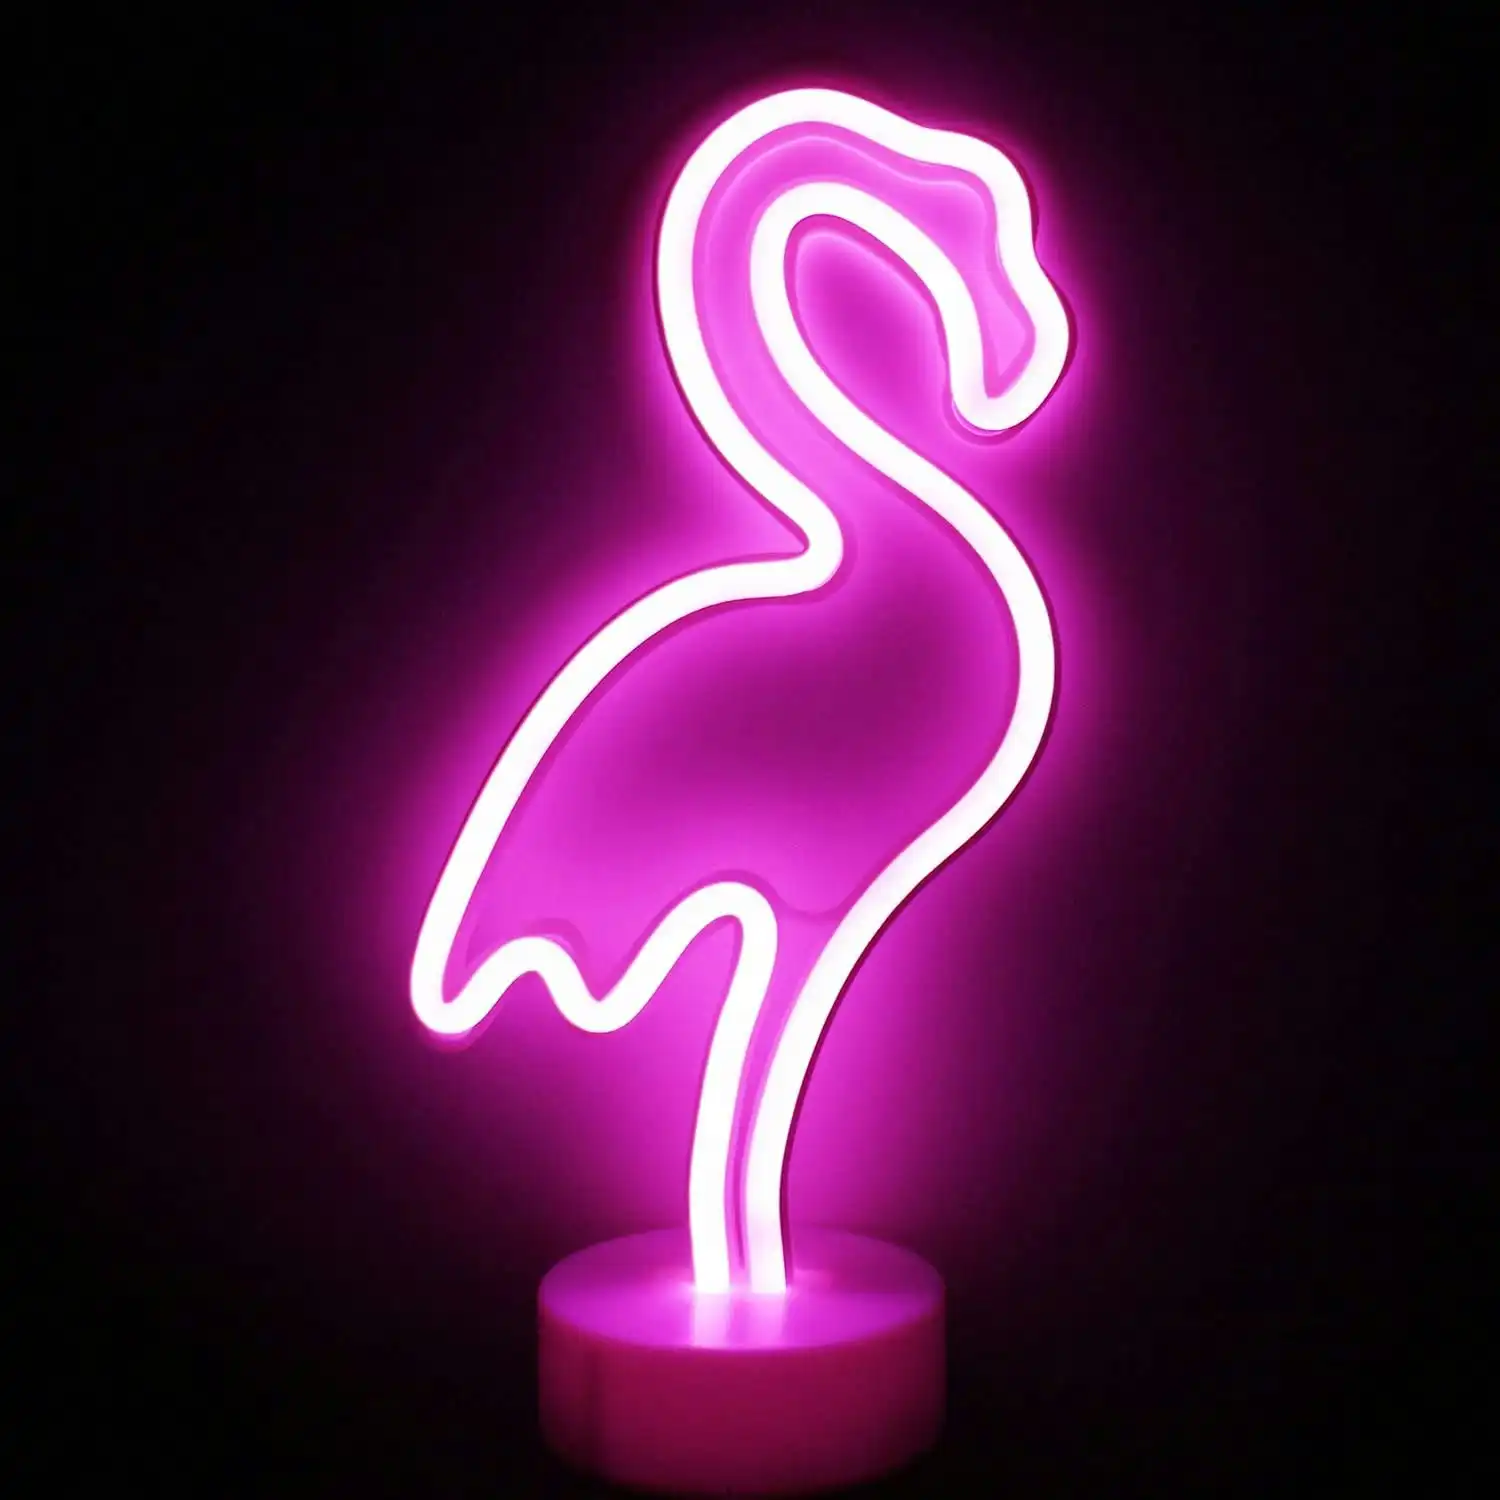 LED Flamingo Neon Light Signs - Room Decor, Pink Neon Lights, Battery Operated Light Up Sign, Bedside Table Lamps